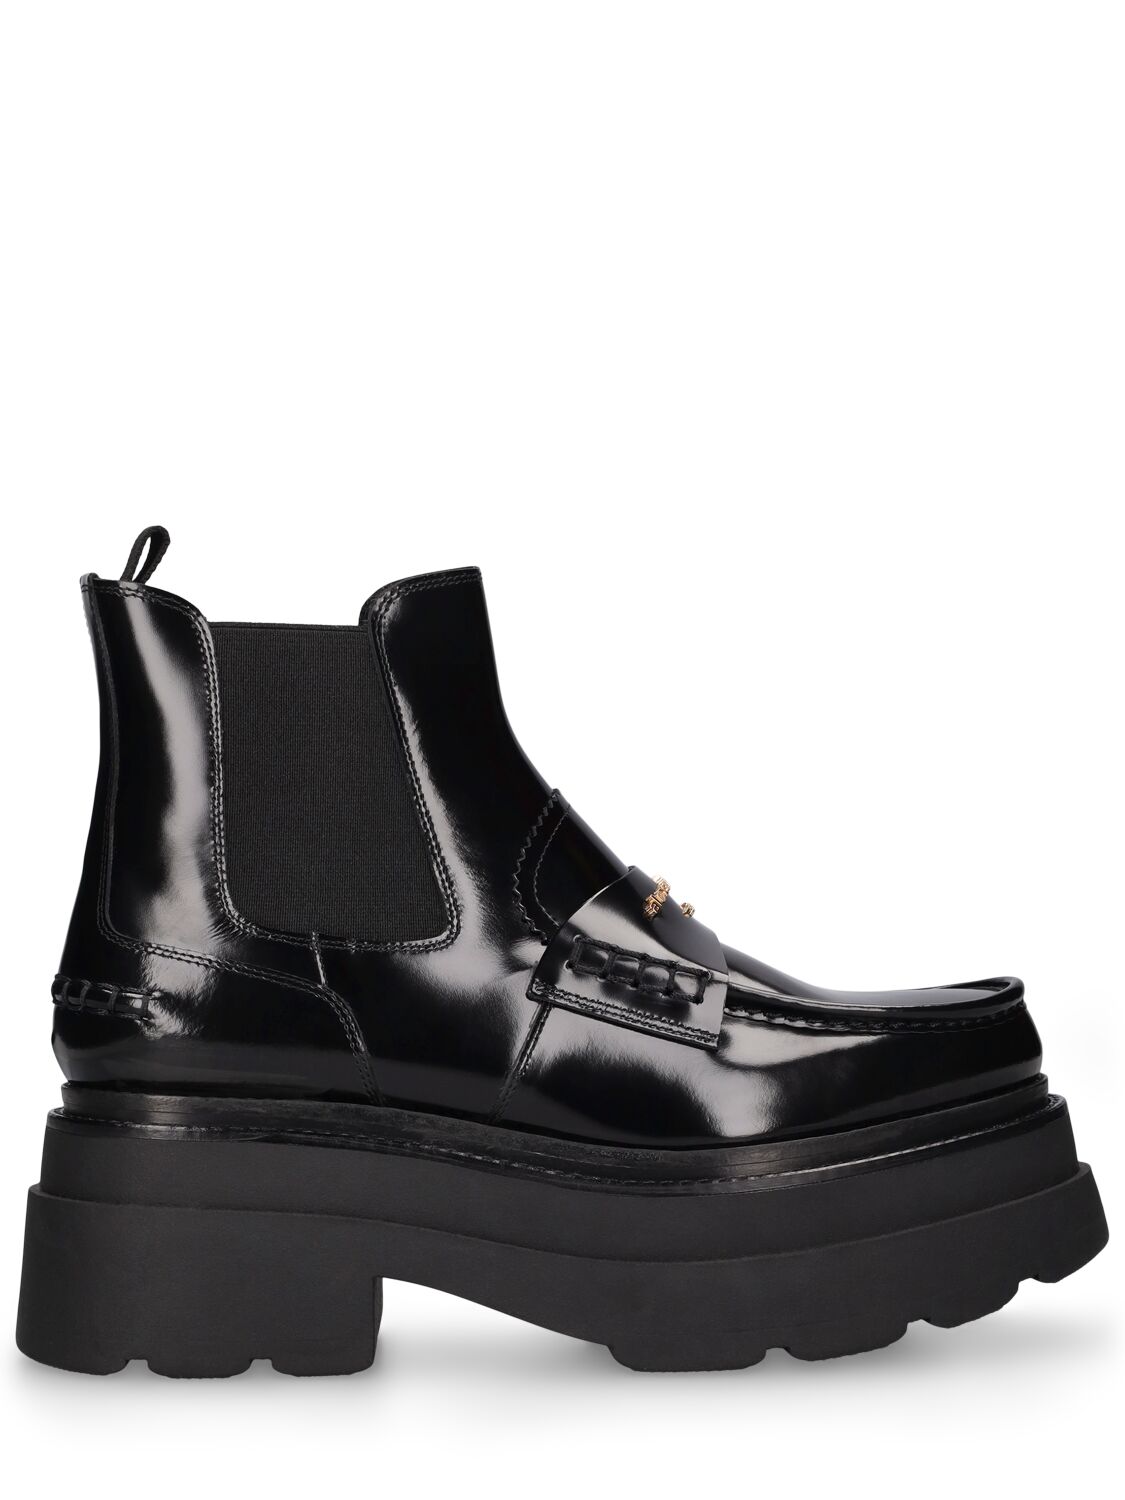 Mm Carter Brushed Leather Ankle Boots - ALEXANDER WANG - Modalova